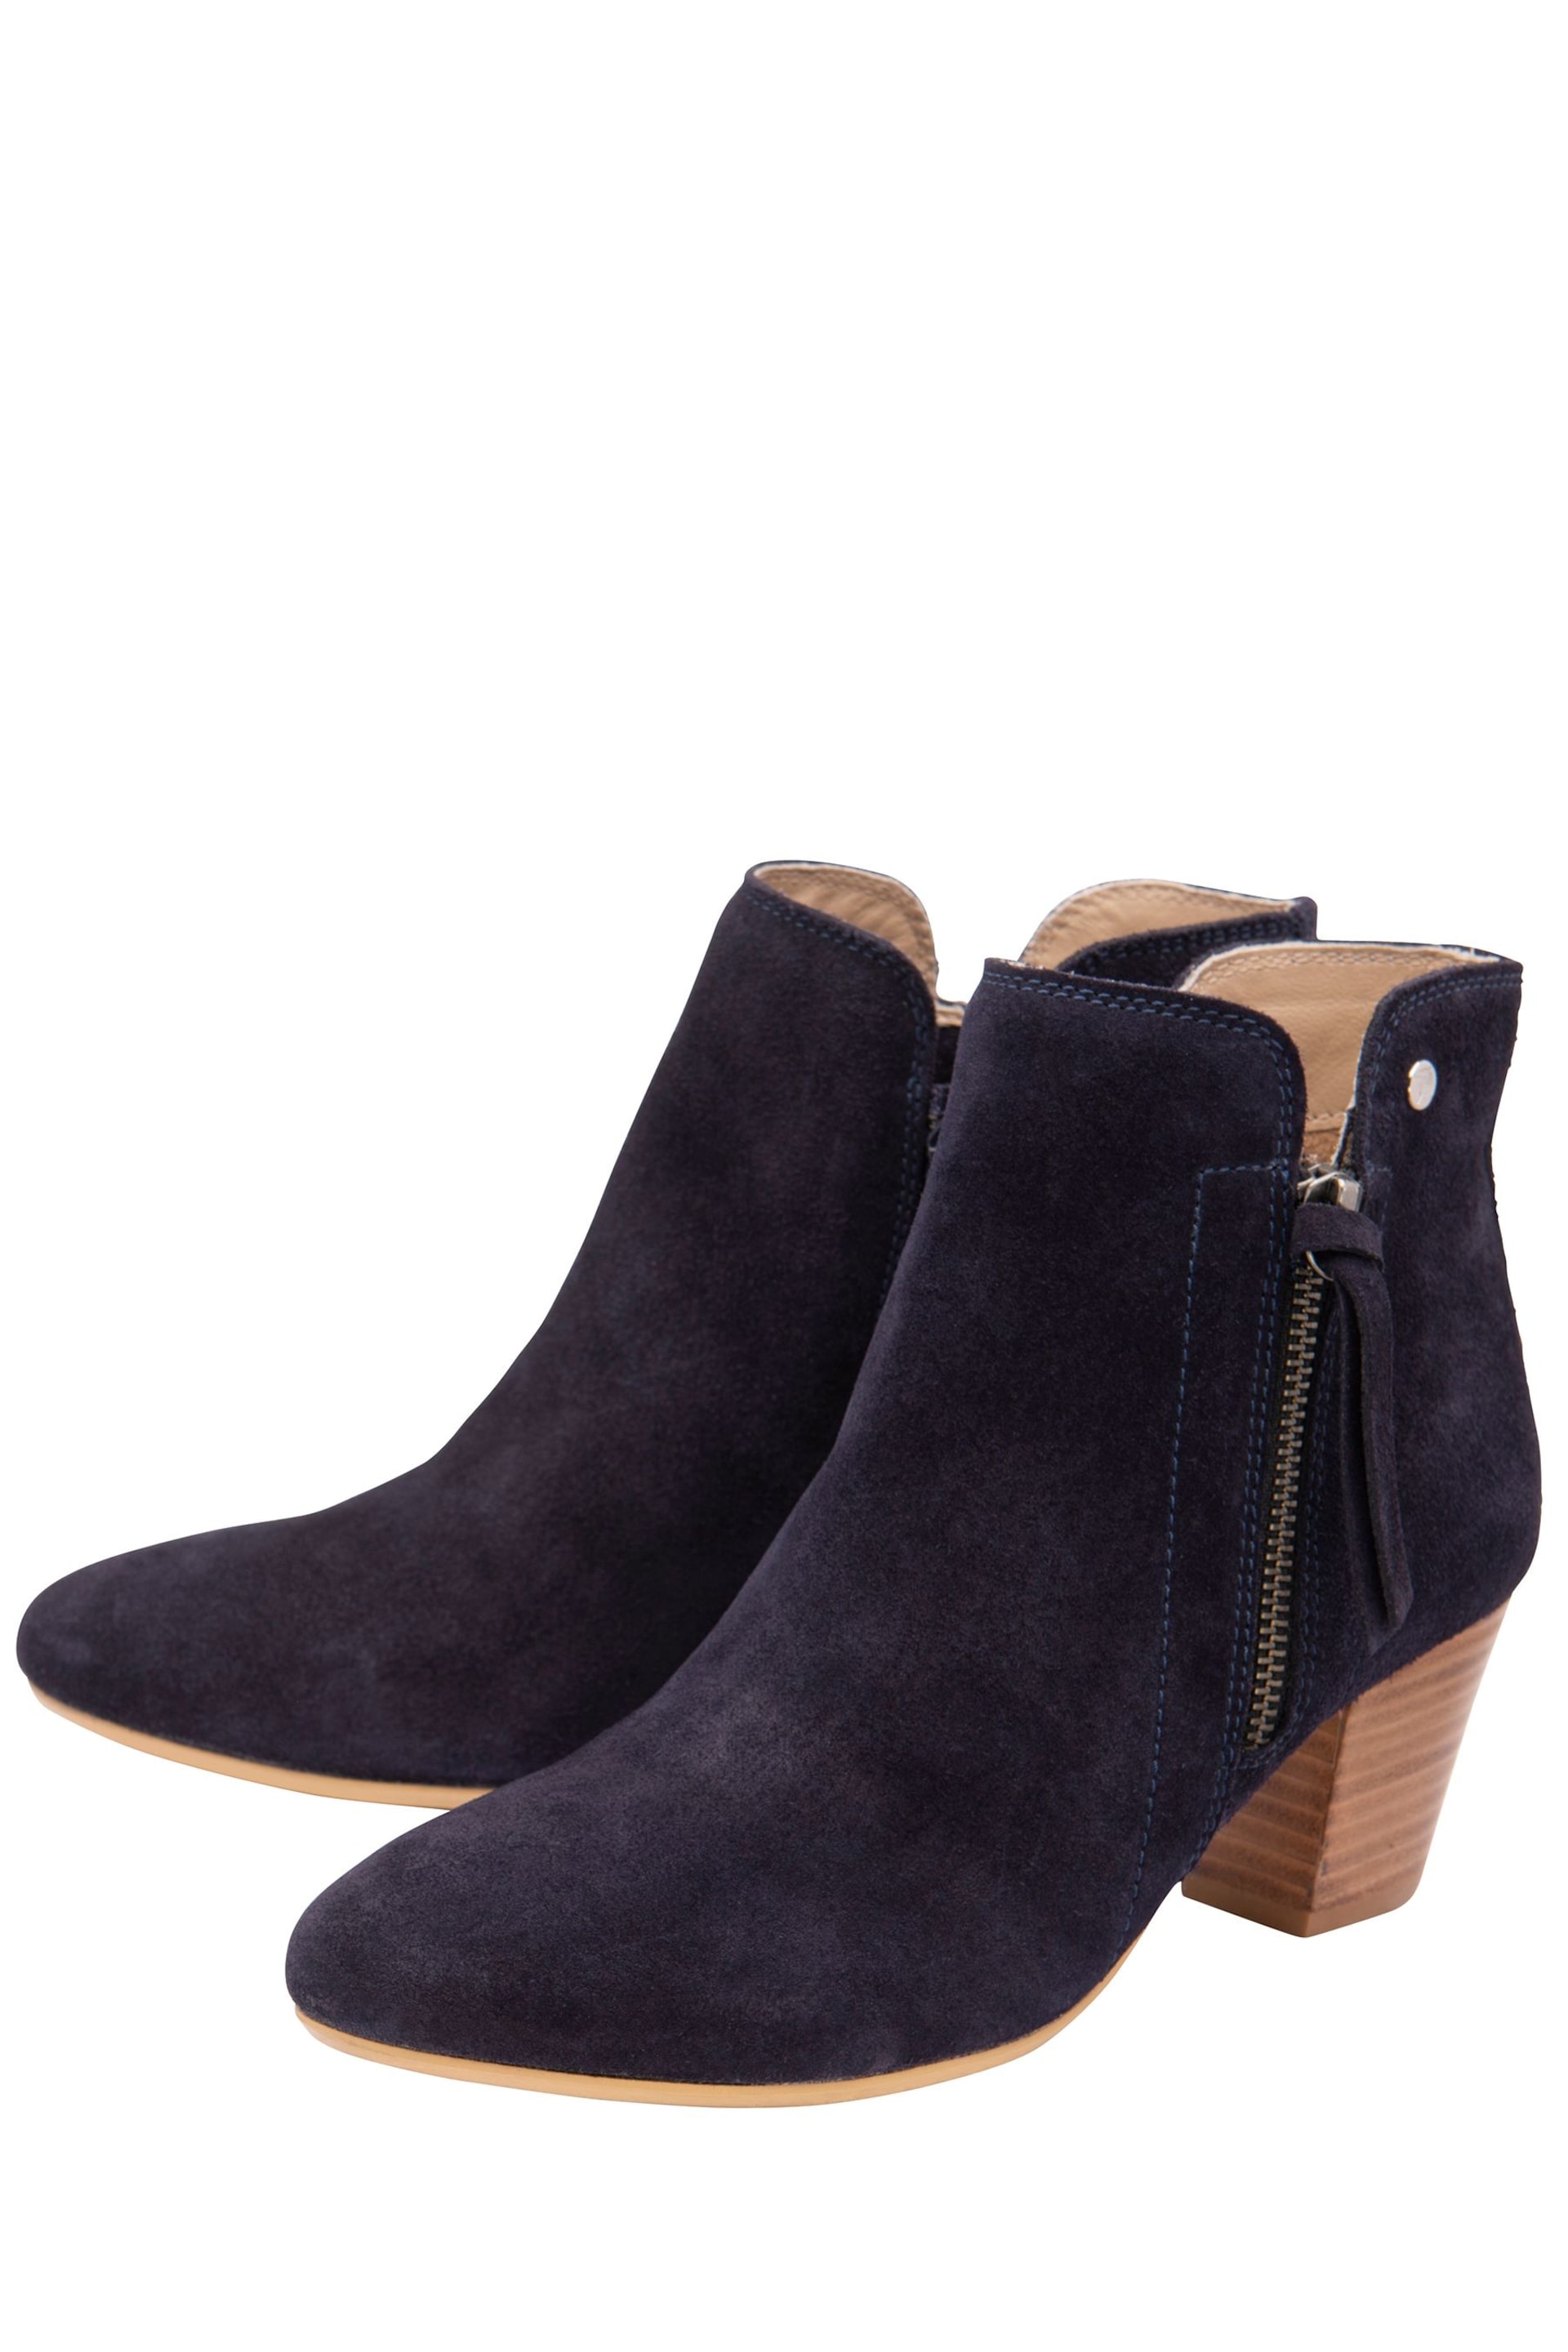 Ravel Blue Suede Leather Block Heel Ankle Boots - Image 2 of 4